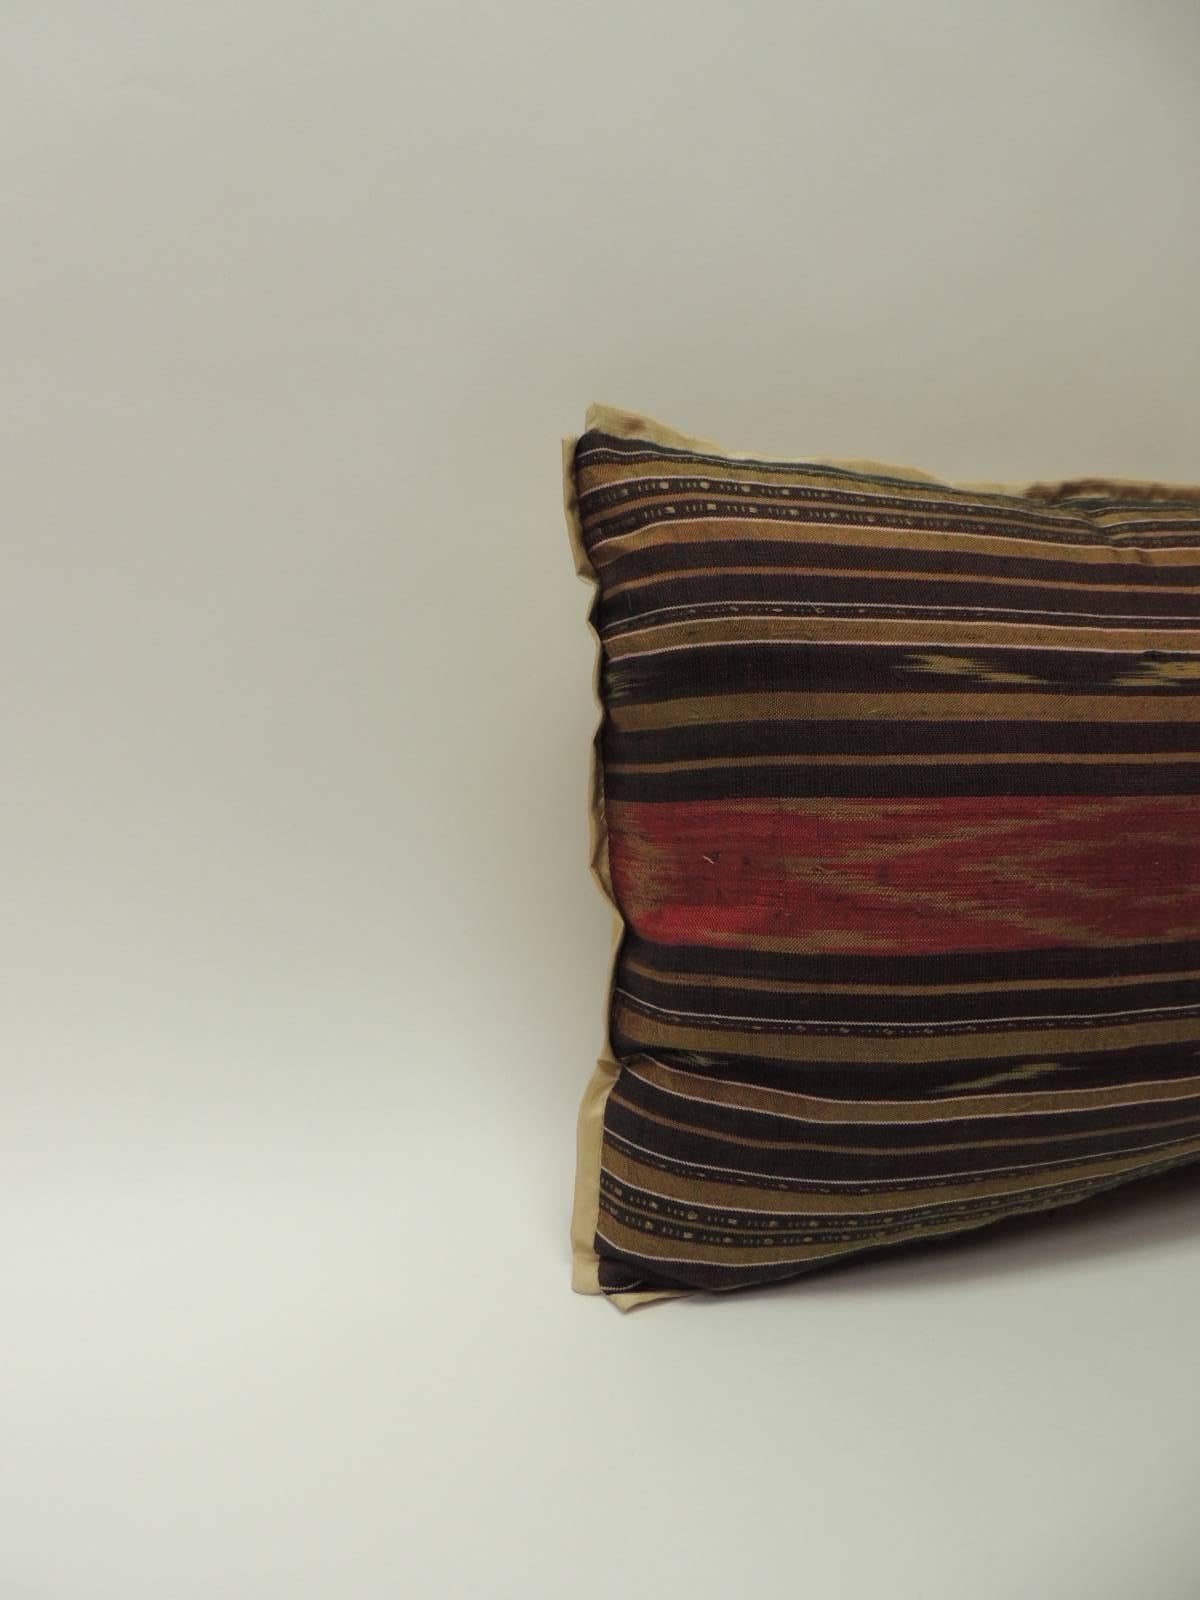 Vintage silk Laos bolster pillow. Traditional tribal pattern in shades of red, gold, brown, yellow and purple.
Embellished with the ATG custom gold flat silk trim same as backing.
Decorative pillow handcrafted and designed in the USA. 
Closure by